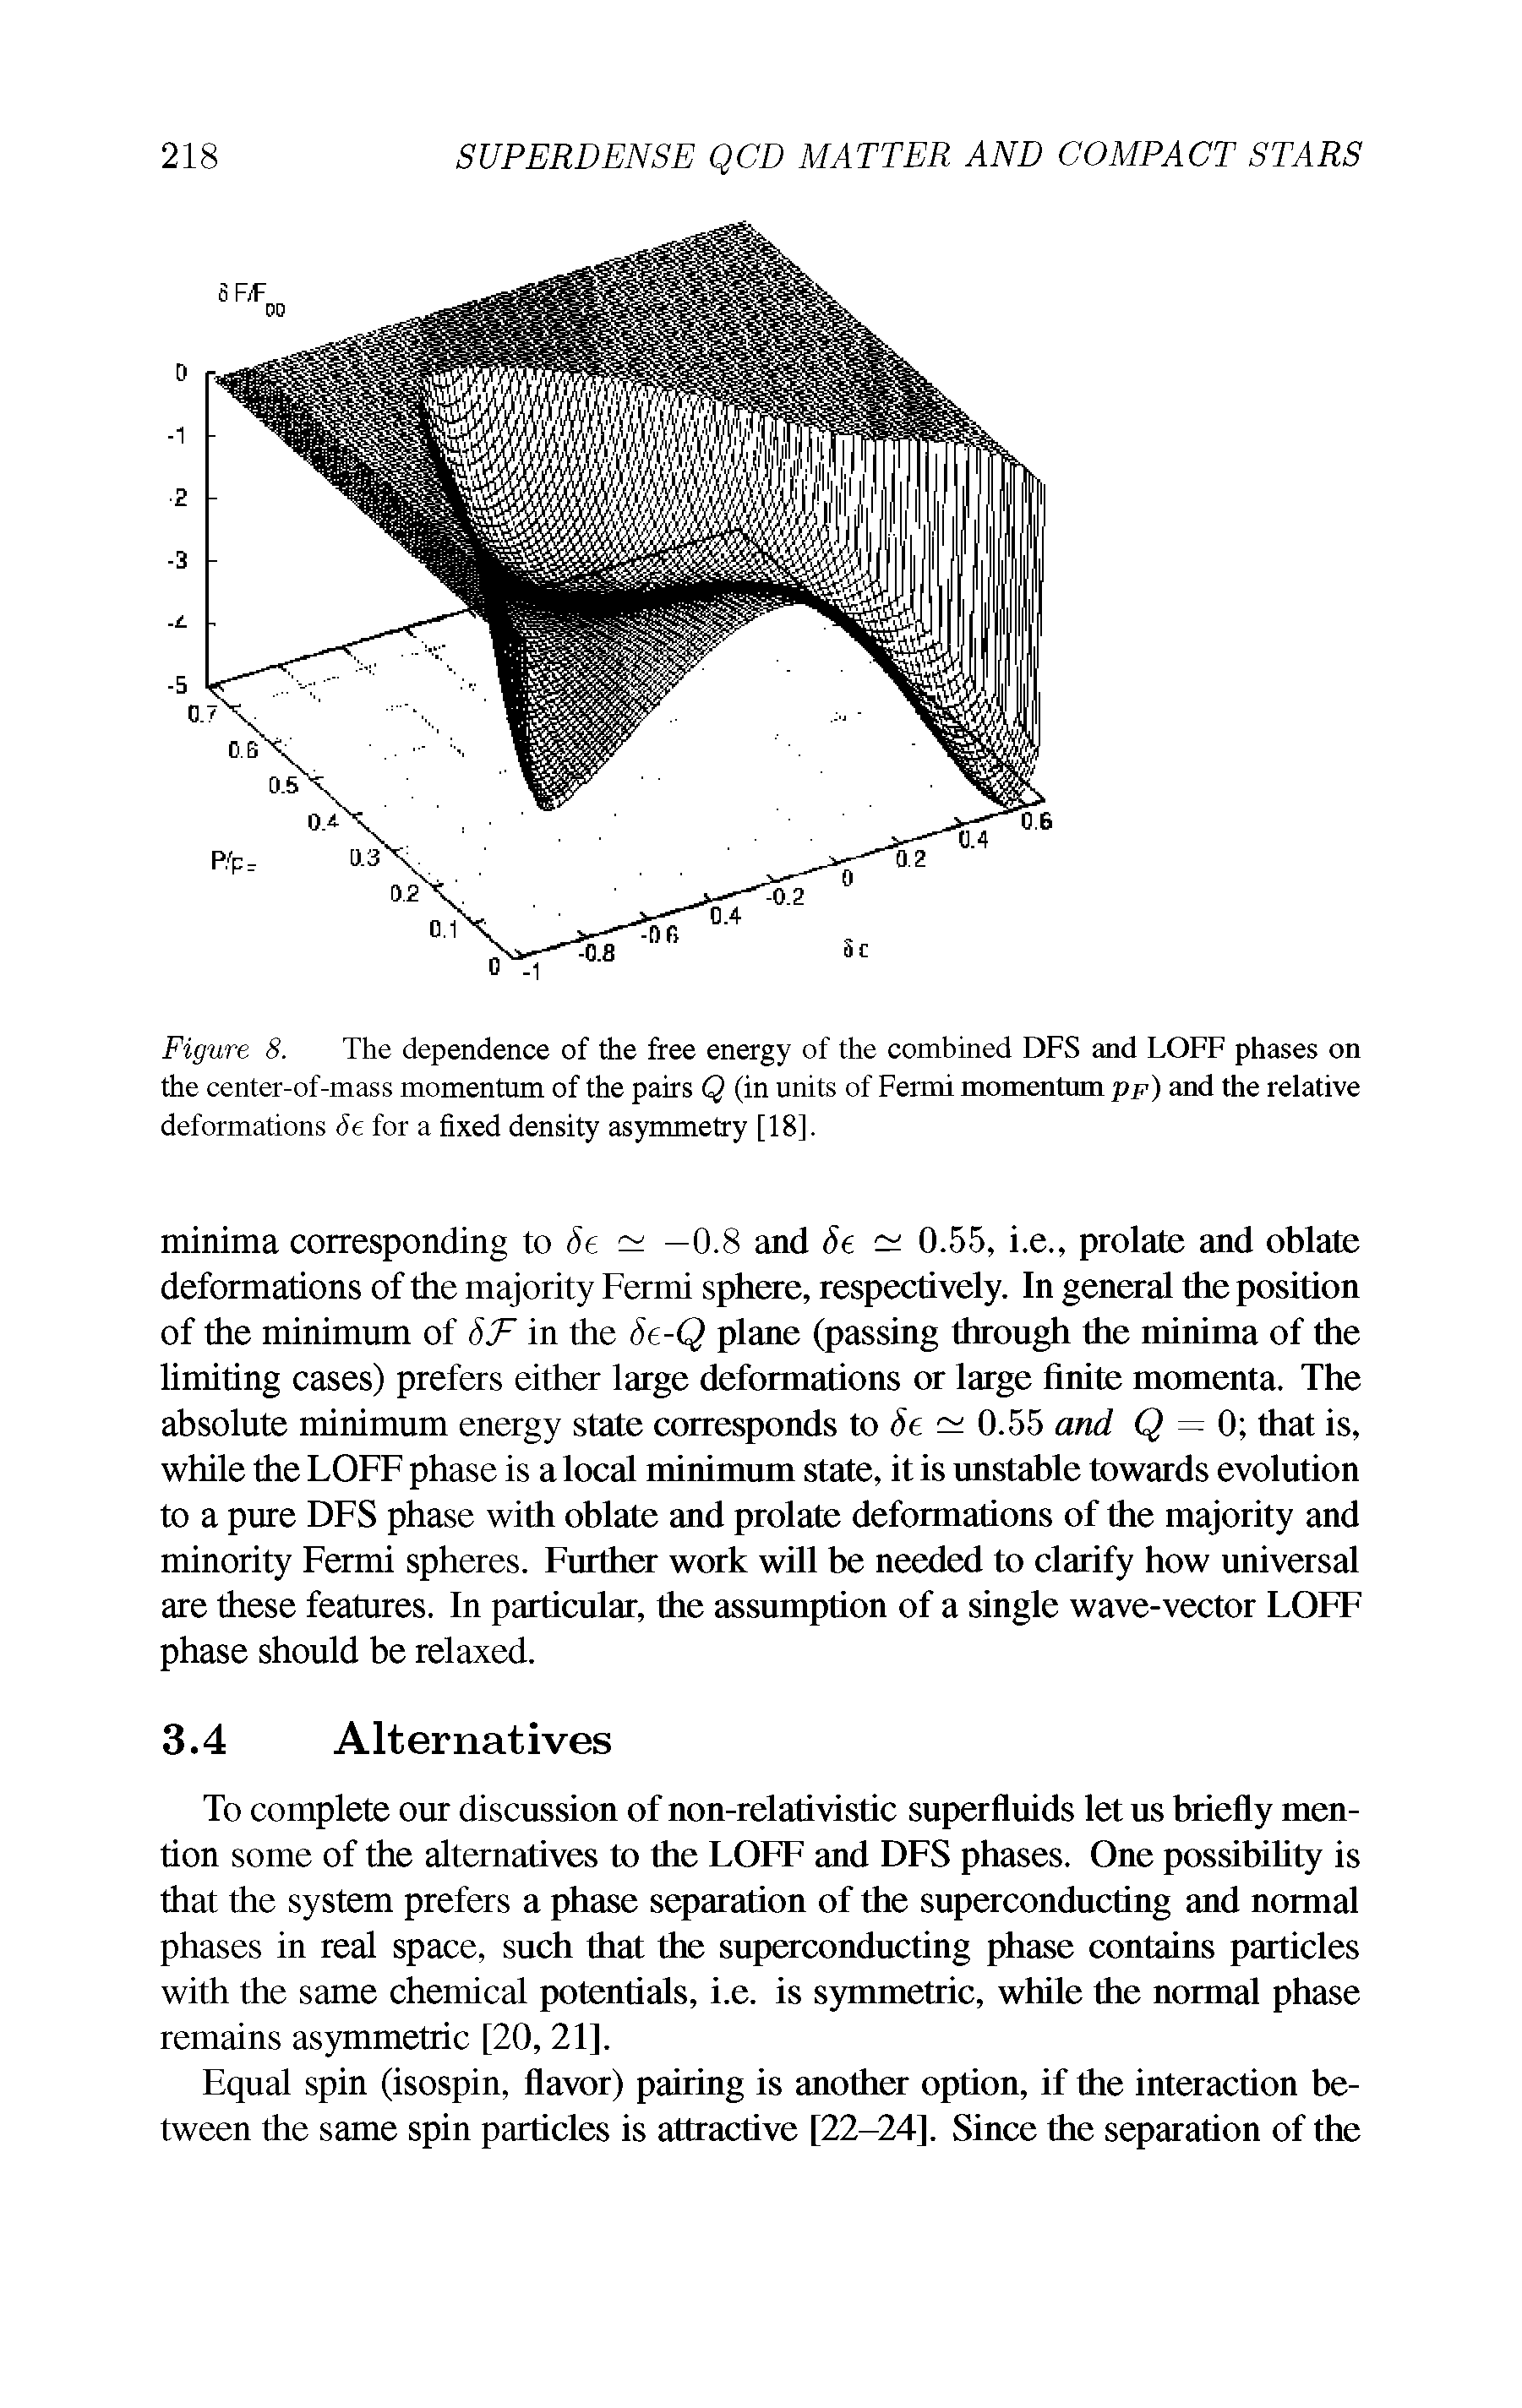 Figure 8. The dependence of the free energy of the combined DFS and LOFF phases on the center-of-mass momentum of the pairs Q (in units of Fermi momentum pf) and the relative deformations Se for a fixed density asymmetry [18].